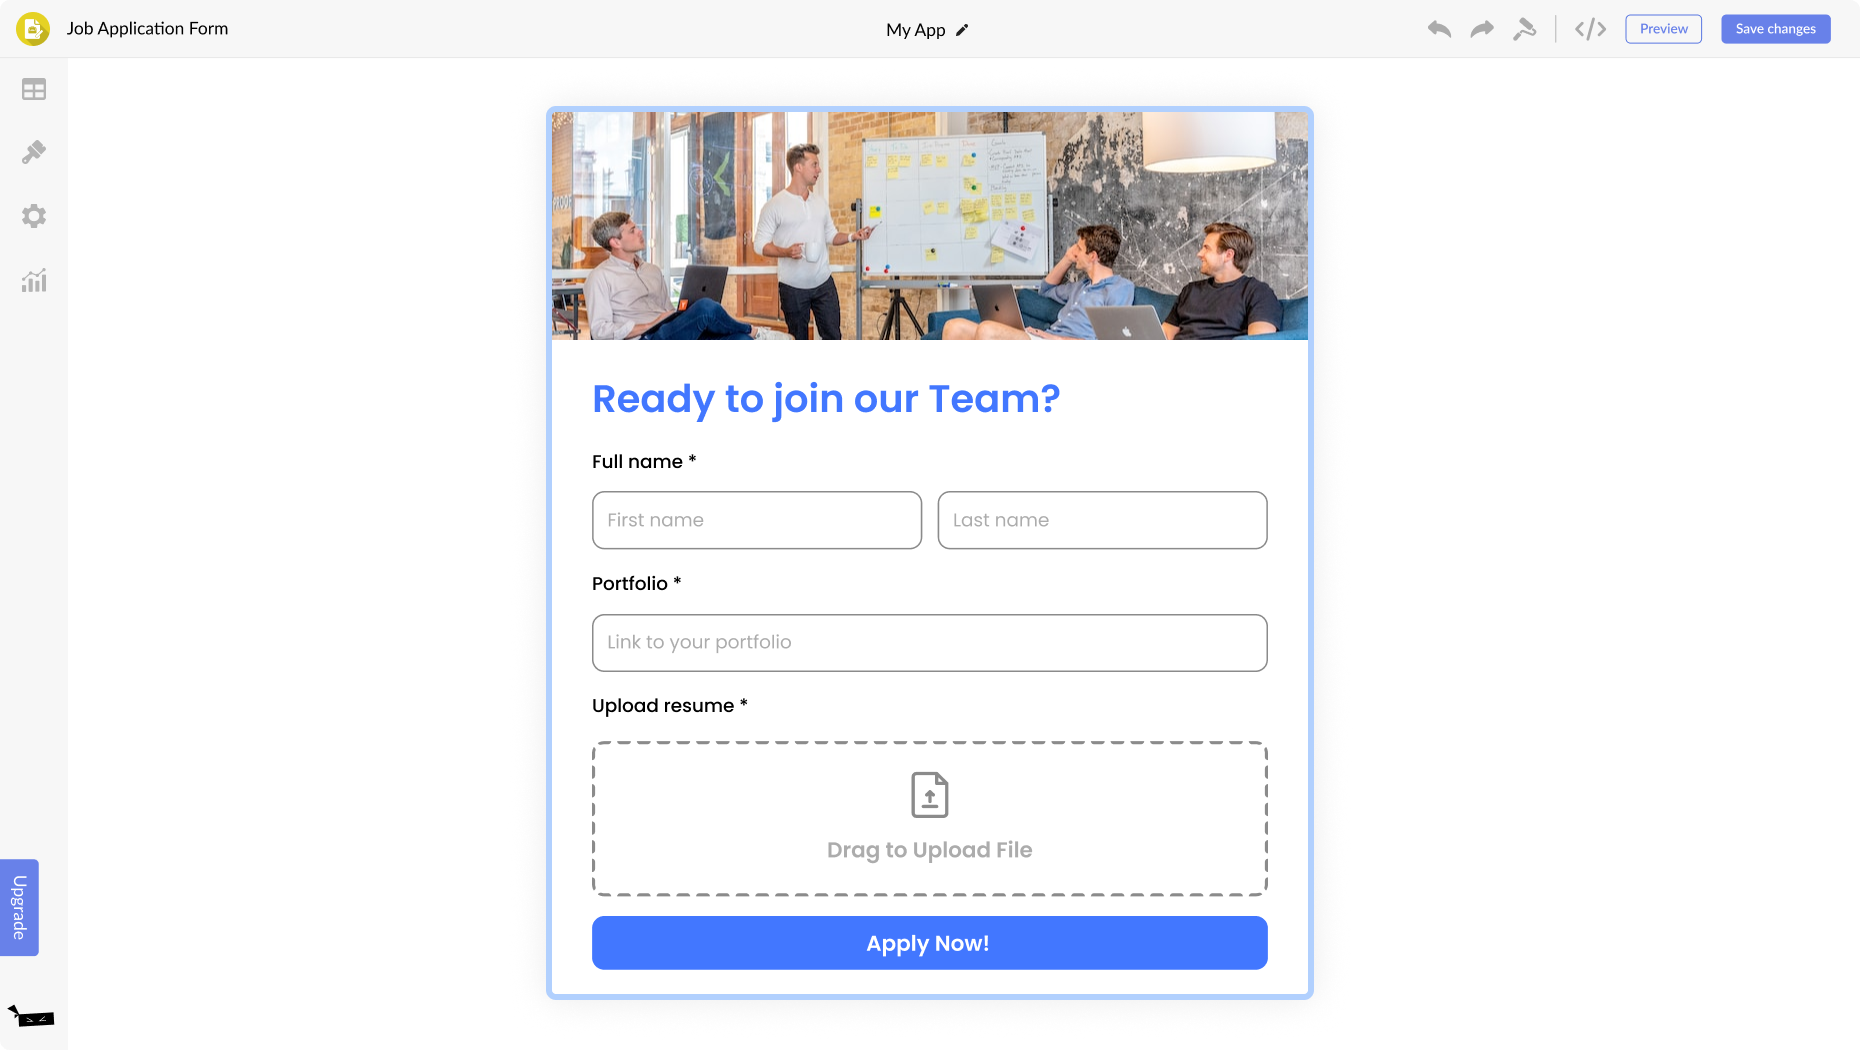 Job Application Form for Weebly